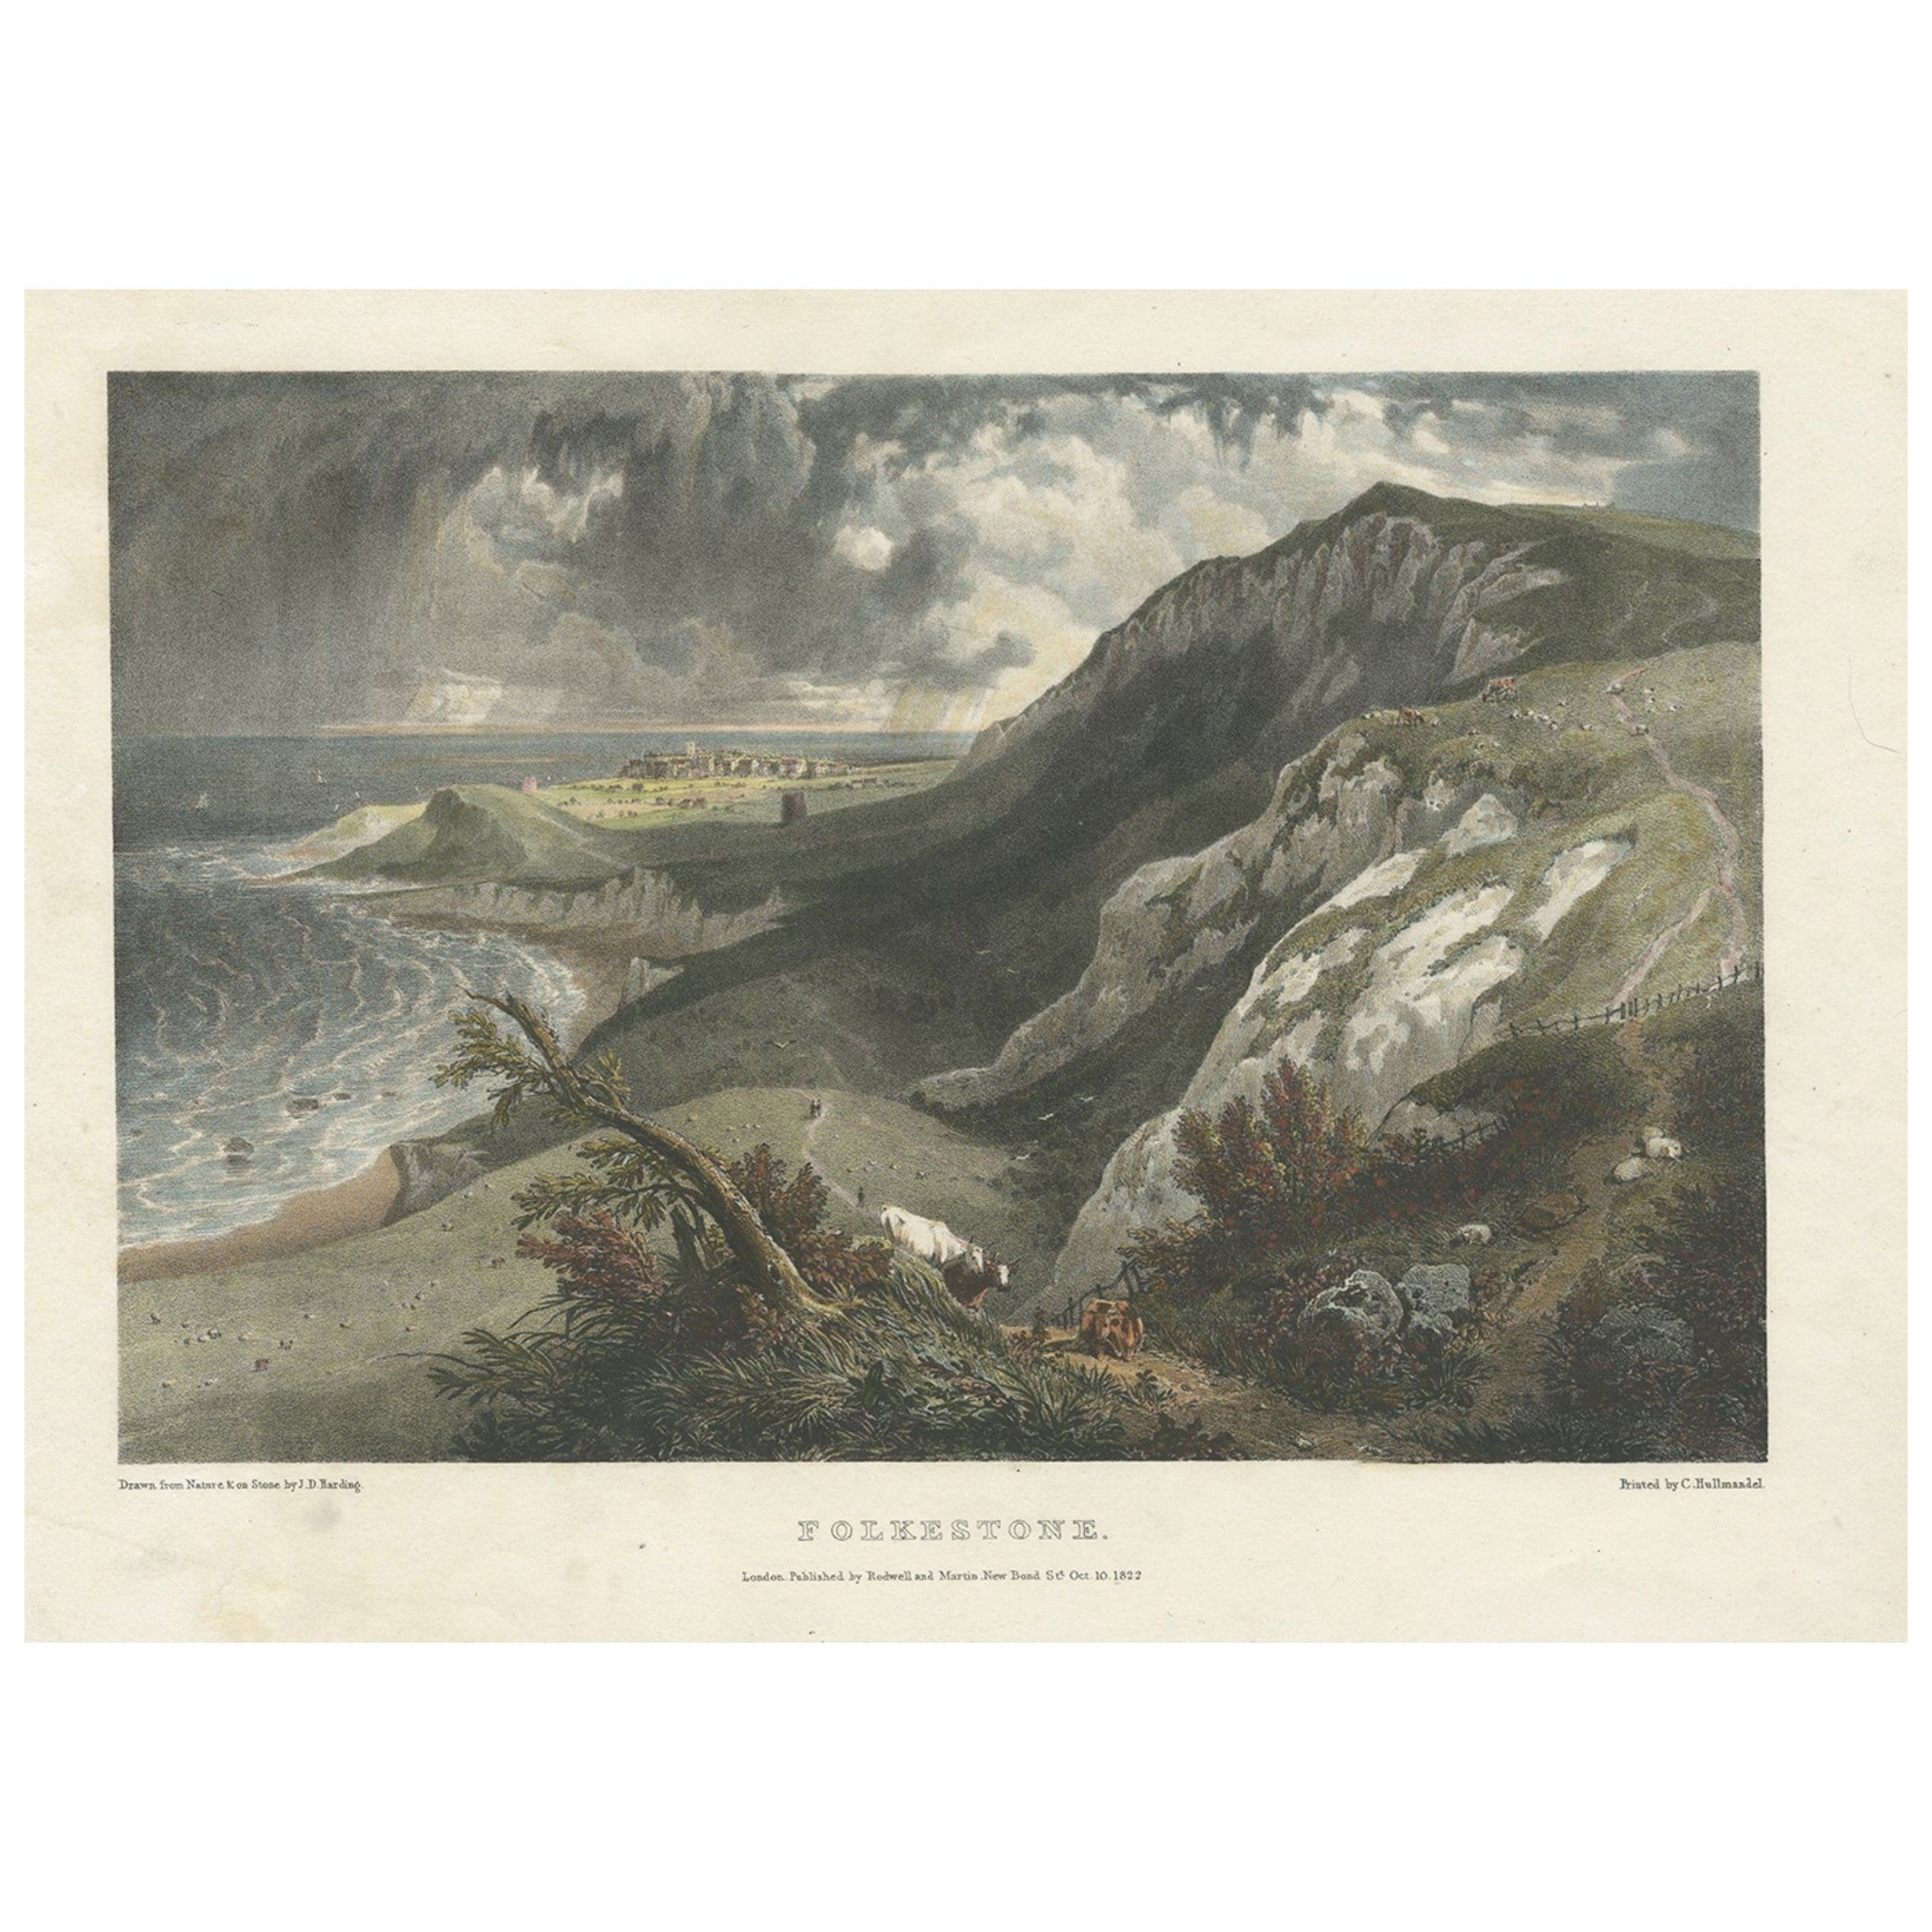 Hand-Colored Print of Folkestone 'United Kingdom' as Seen from the East, 1822